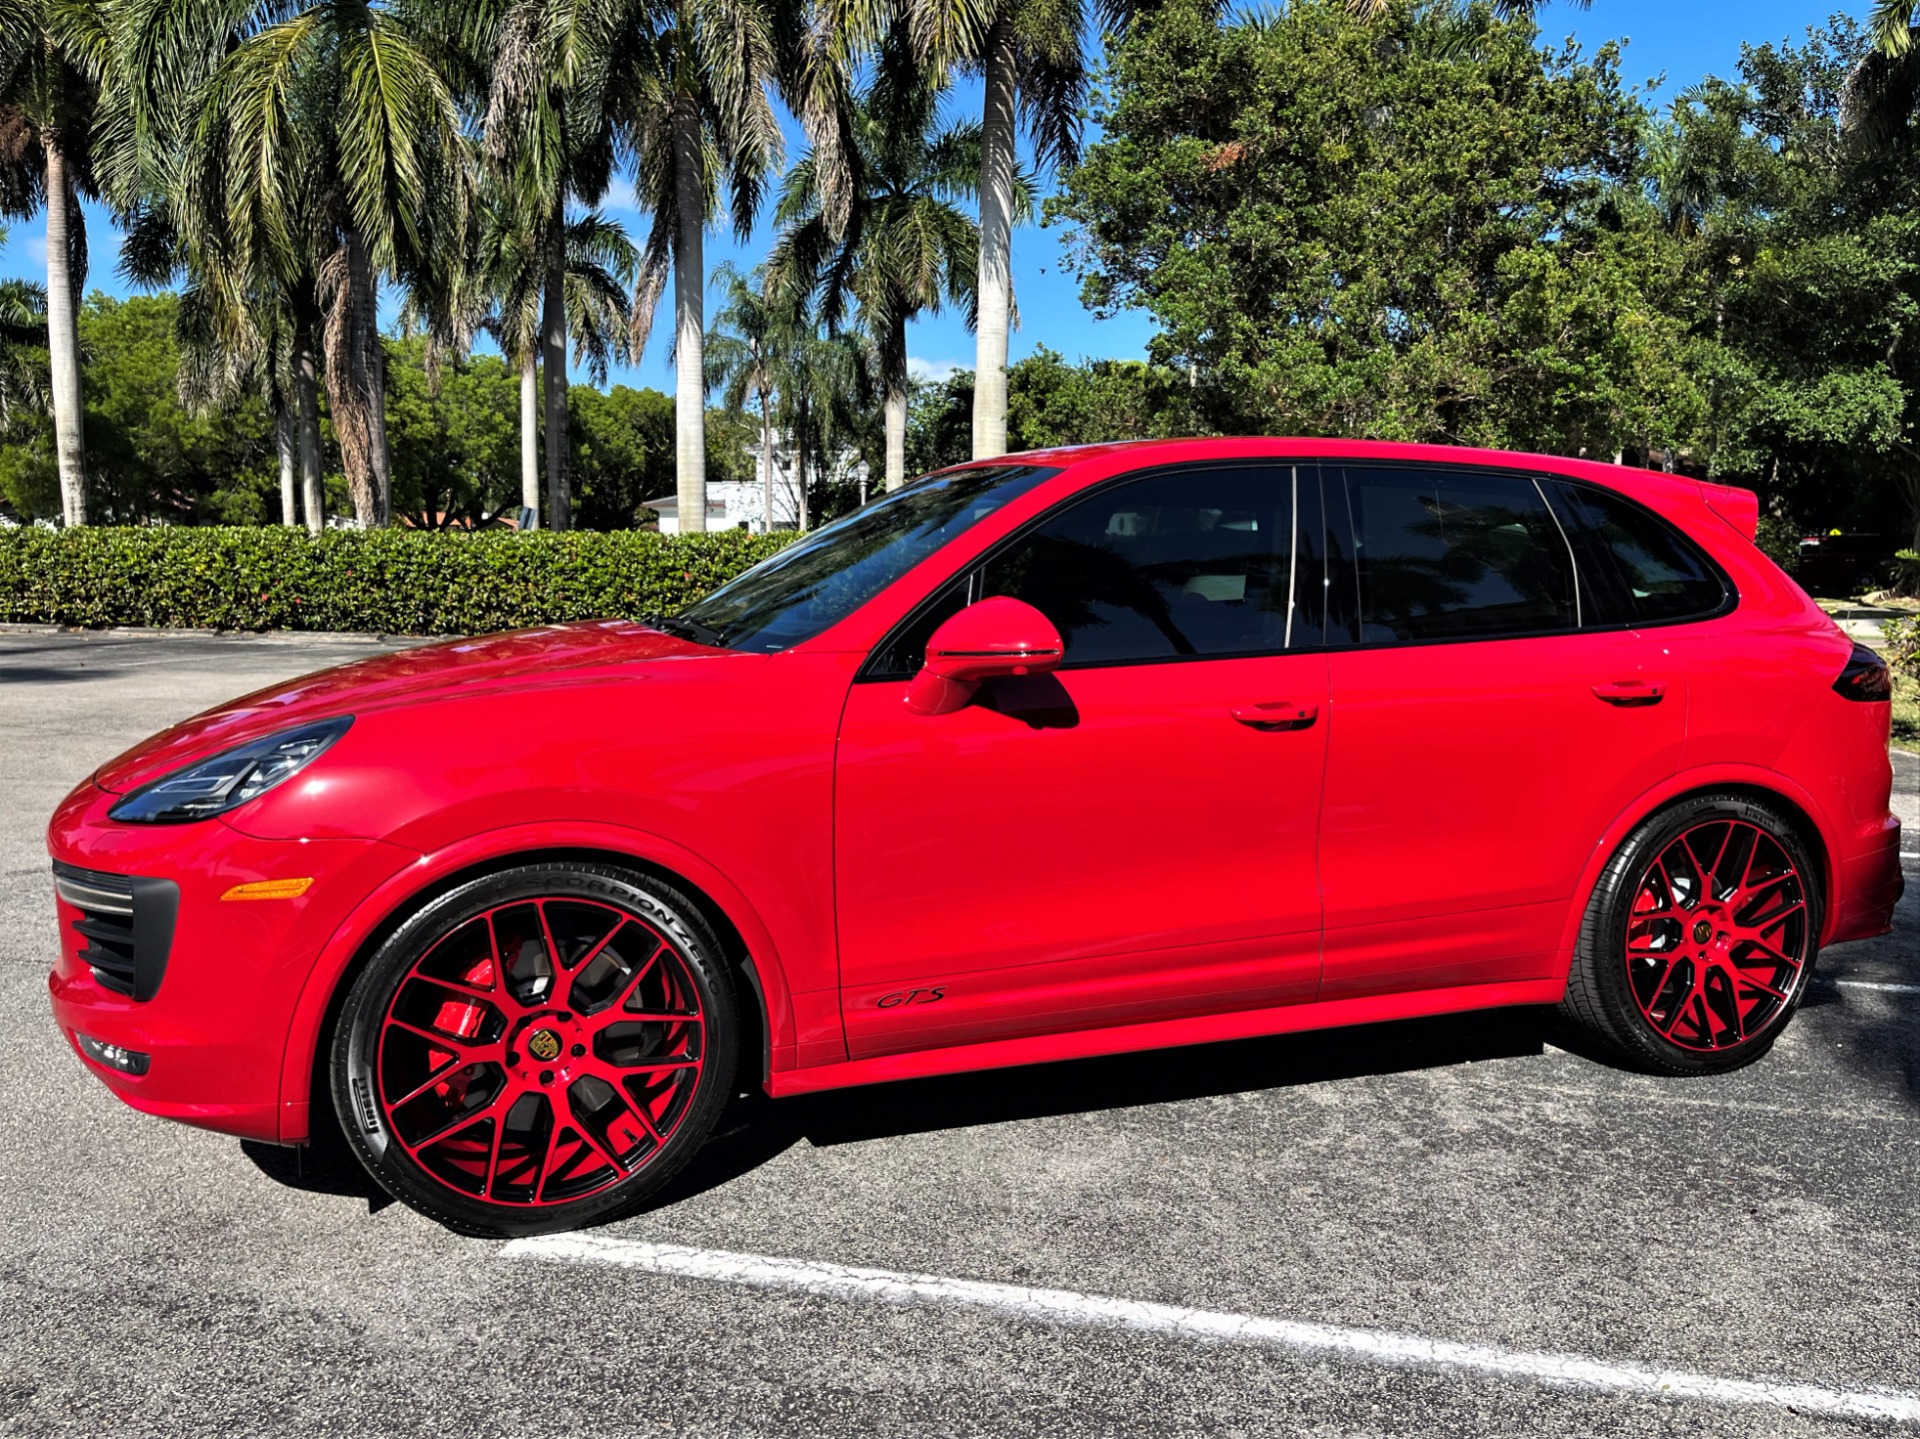 Used 2017 Porsche Cayenne GTS for sale $88,850 at The Gables Sports Cars in Miami FL 33146 3